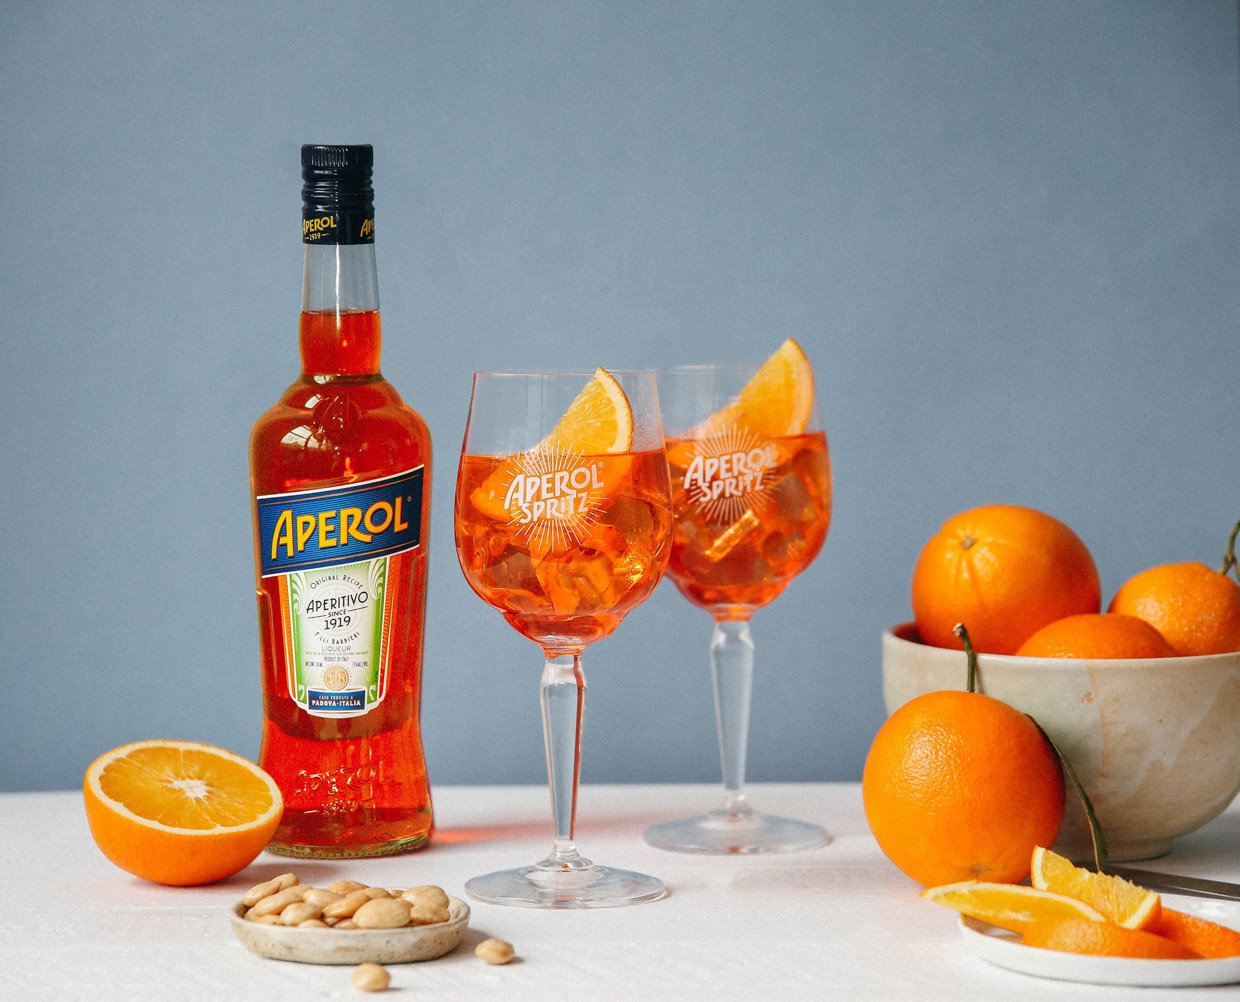 Forurenet Mutton lommelygter Brighten Up Your Meals with an Aperol Spritz